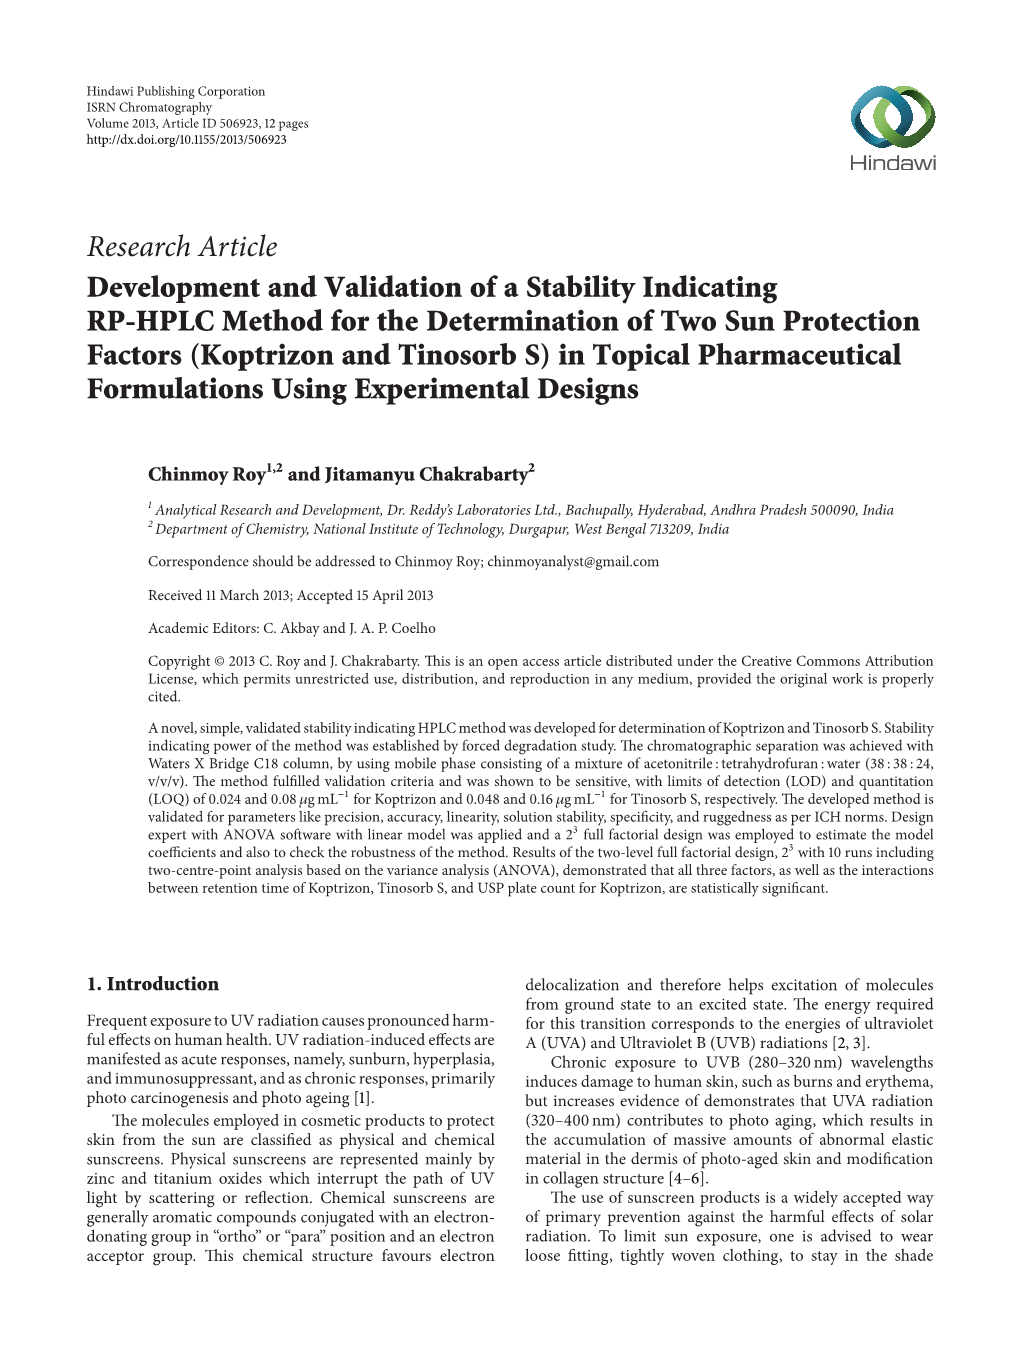 Research Article Development and Validation of a Stability Indicating